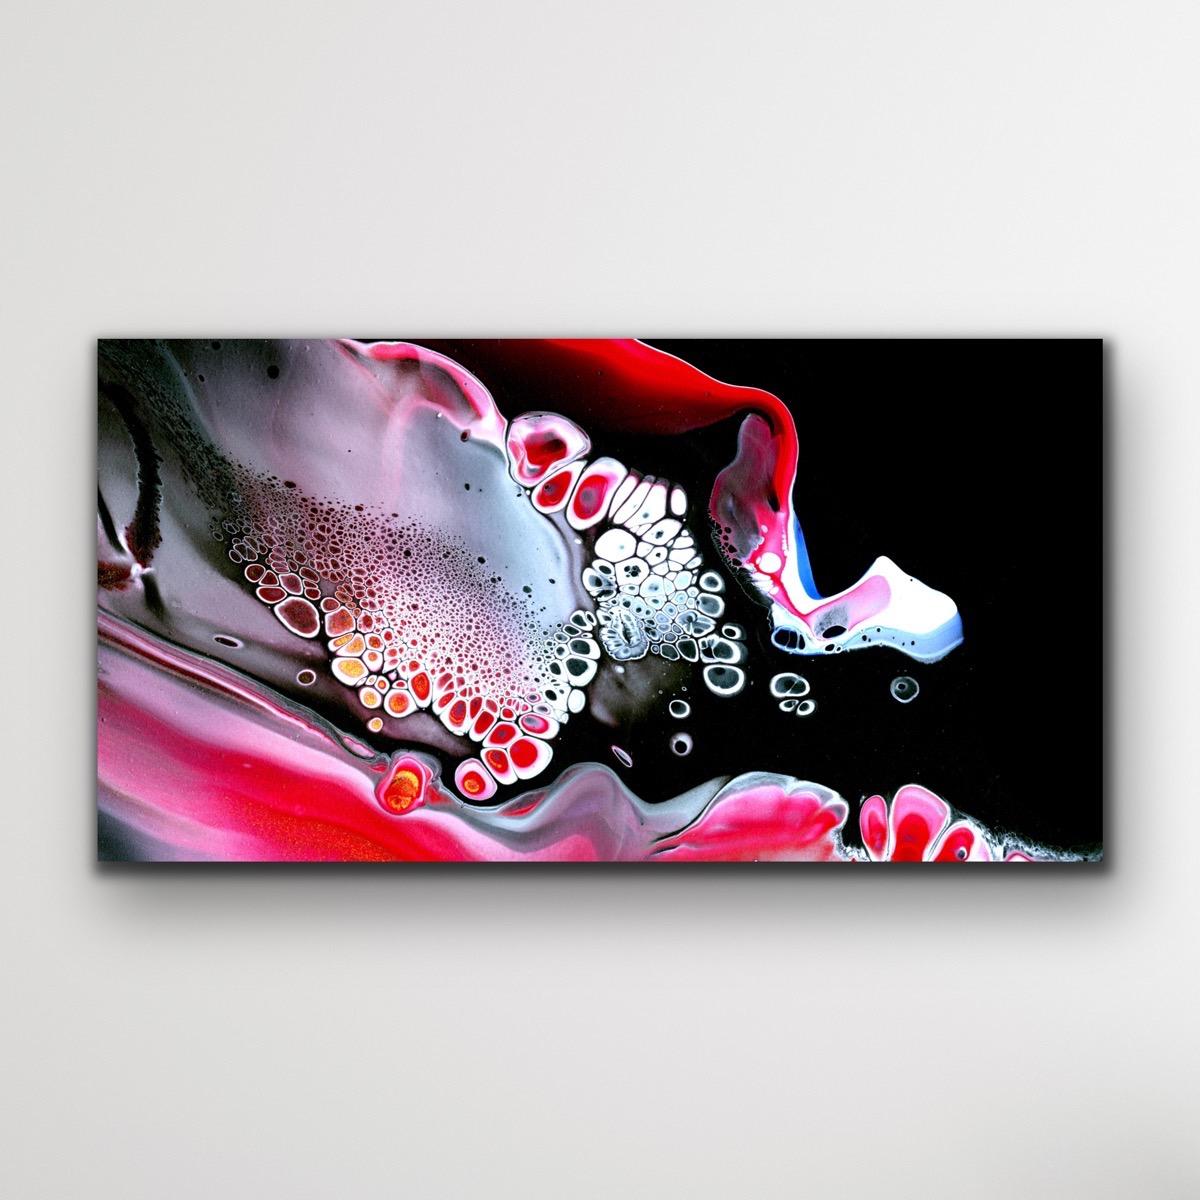 This modern abstract painting is printed on a lightweight metal composite and is suitable for indoor or outdoor decor. This open edition print of Celeste Reiter's original painting is signed by the artist. 

-Title: Vixen
-Artist: Celeste